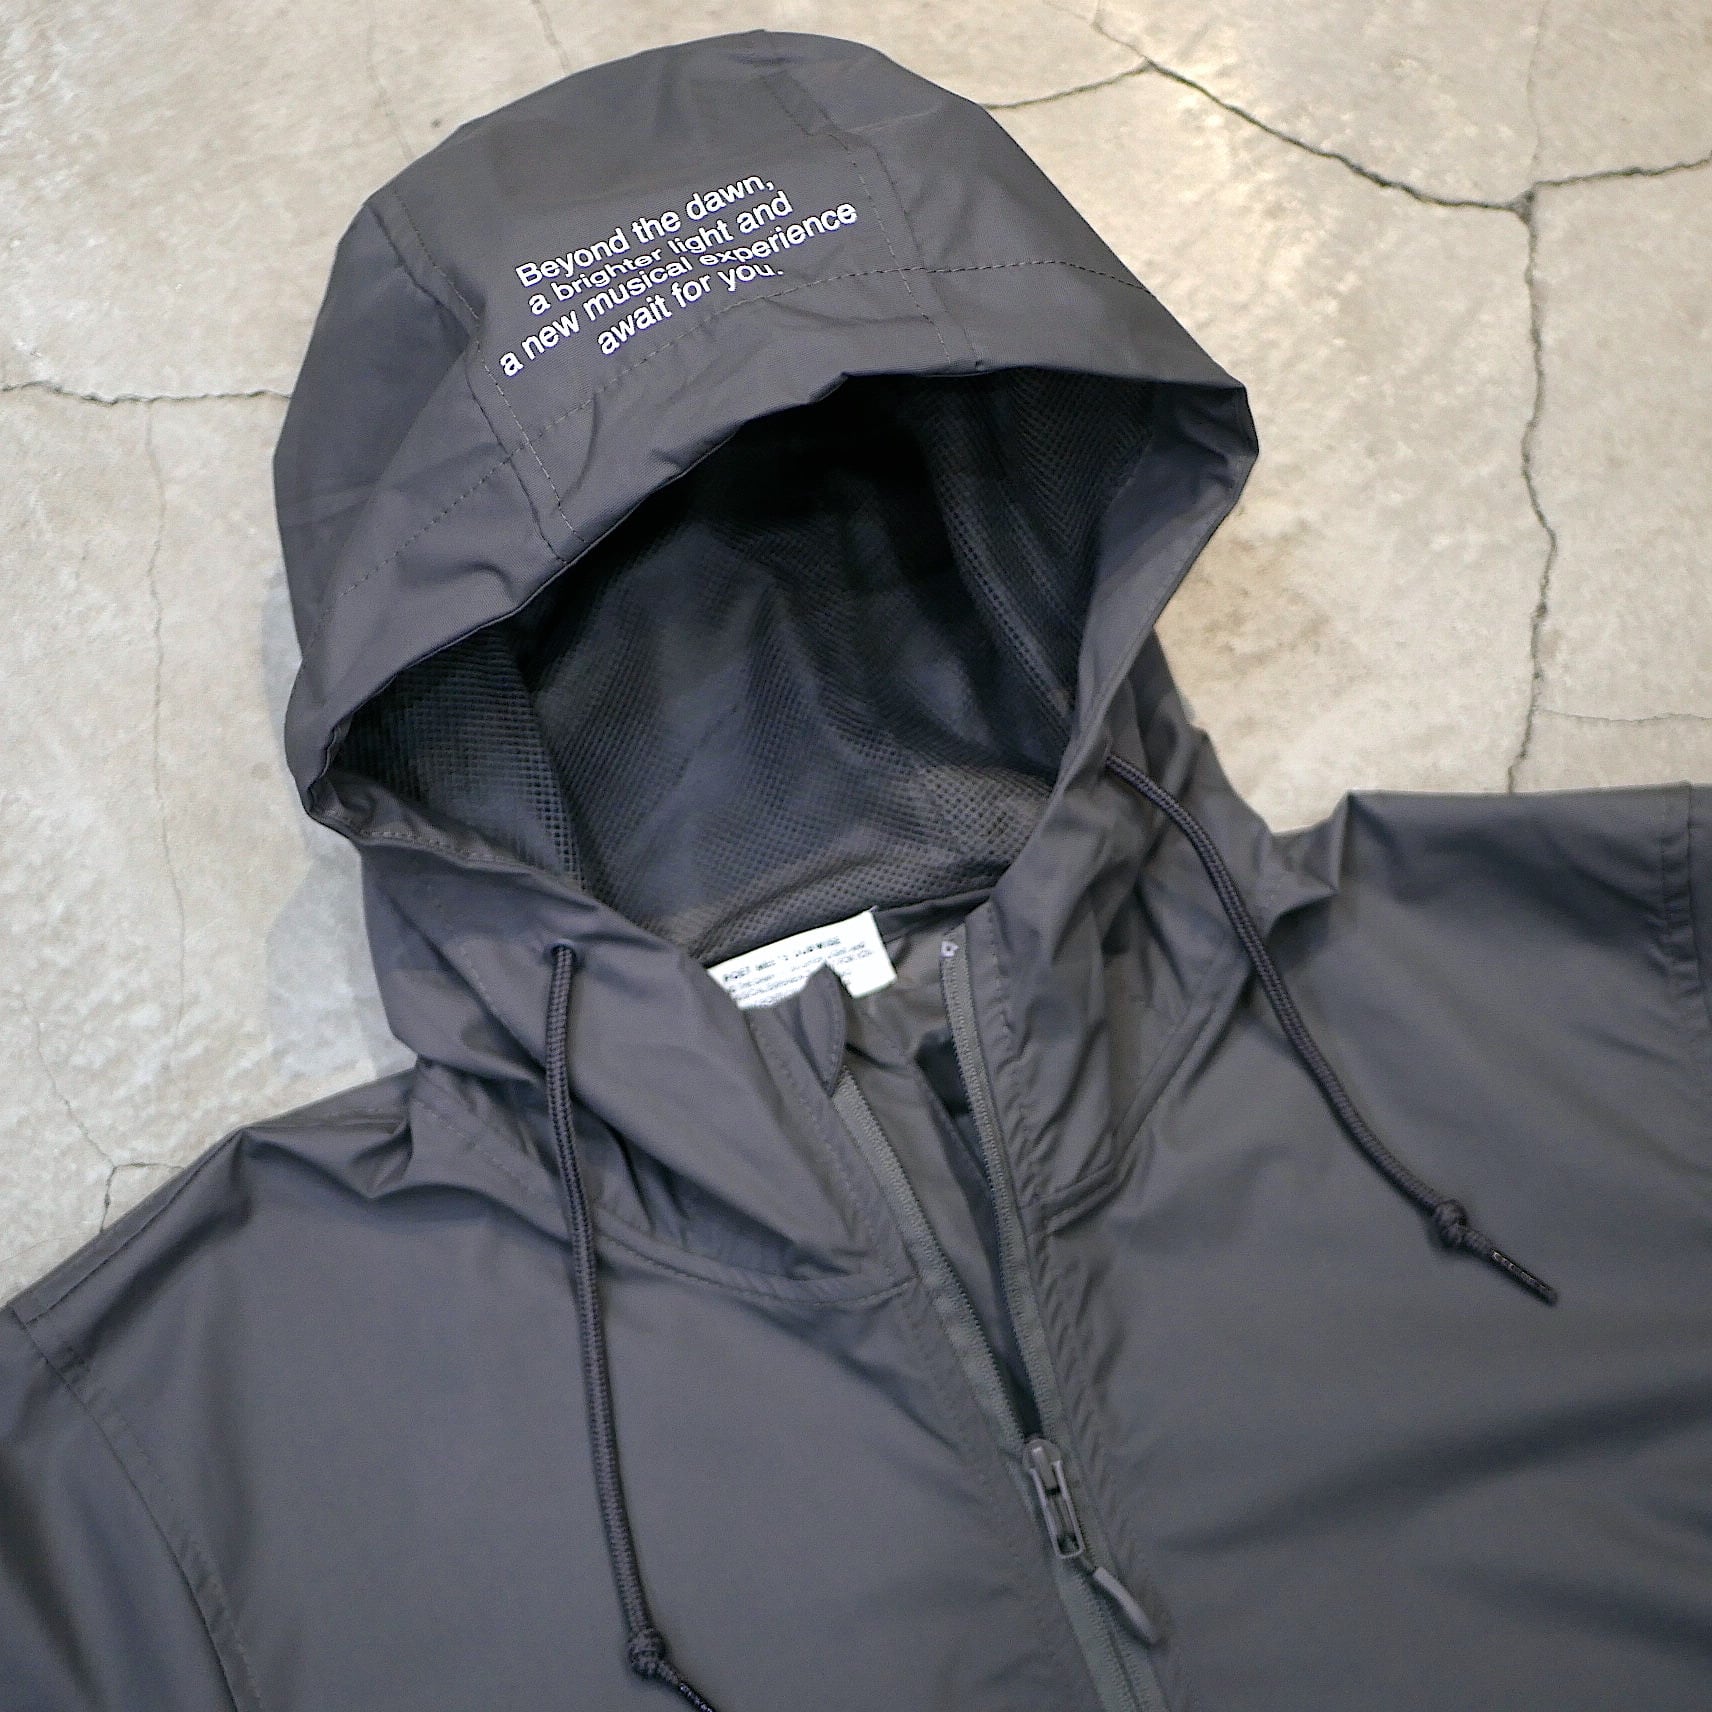 SILENT POETS / NYLON ANORAK PARKA（POET MEETS DUBWISE） | st. valley house -  セントバレーハウス powered by BASE